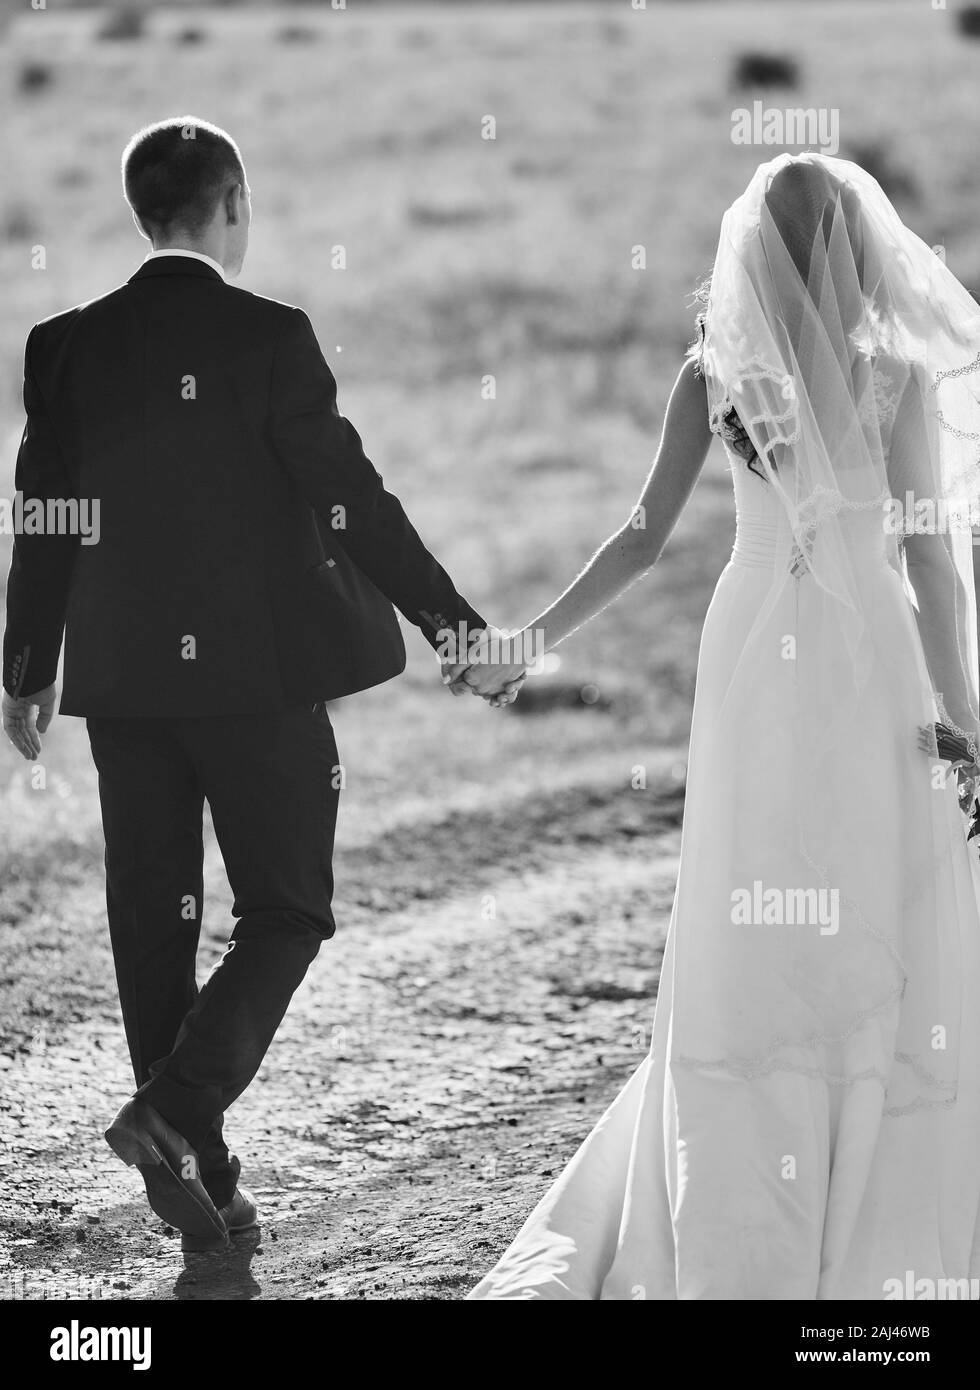 Bride and Groom at wedding Day walking Outdoors on spring nature. Bridal couple, Happy Newlywed woman and man embracing in green park. Loving wedding Stock Photo